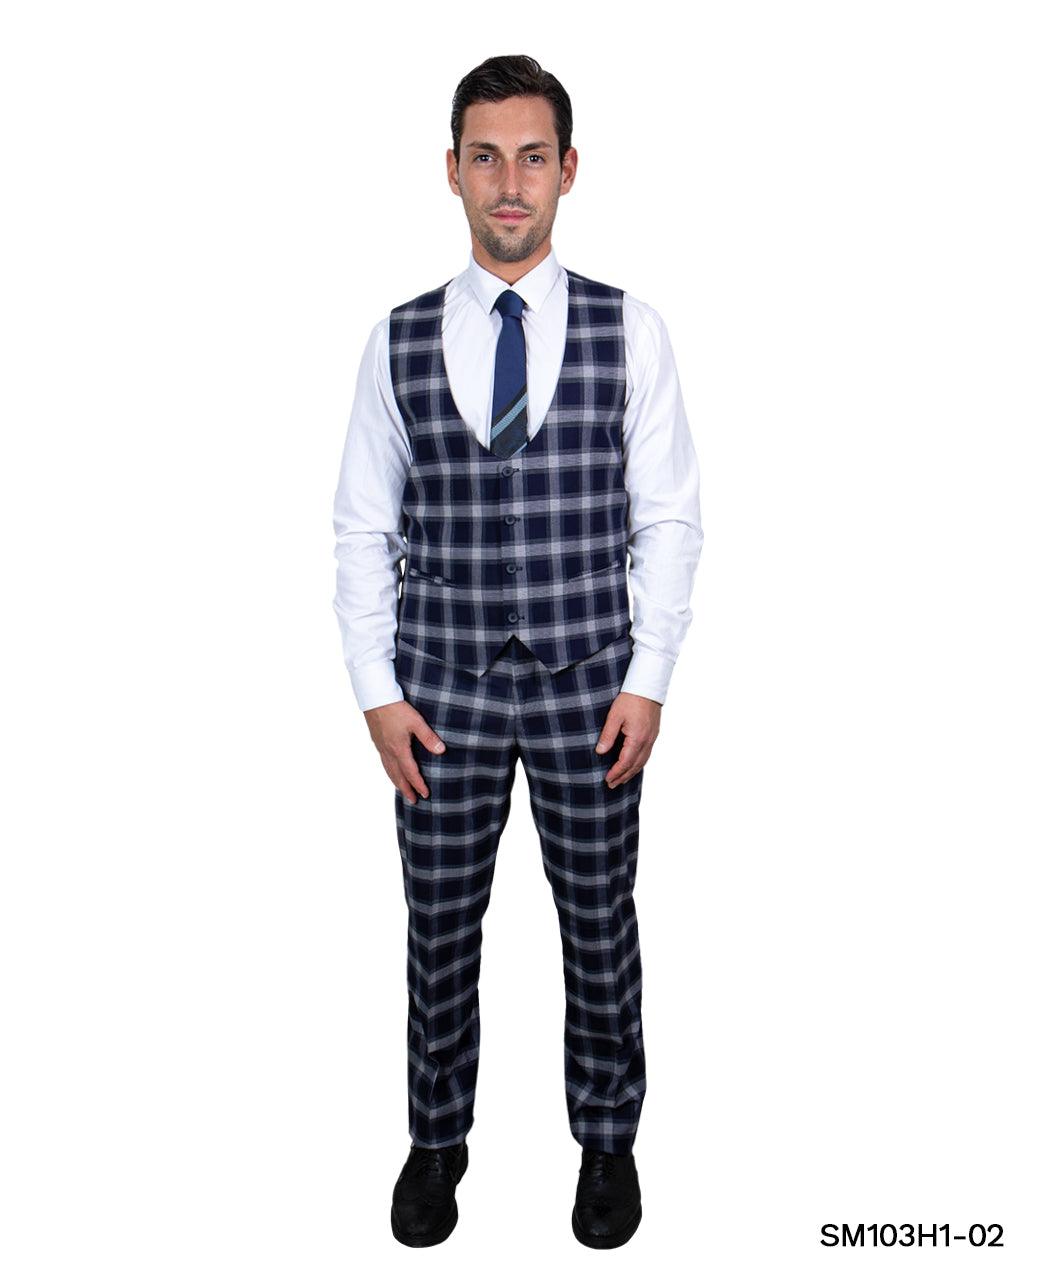 Stacy Adams Hybrid Fit Double-Breast Suit, Navy Blue & White Plaid - Julinie